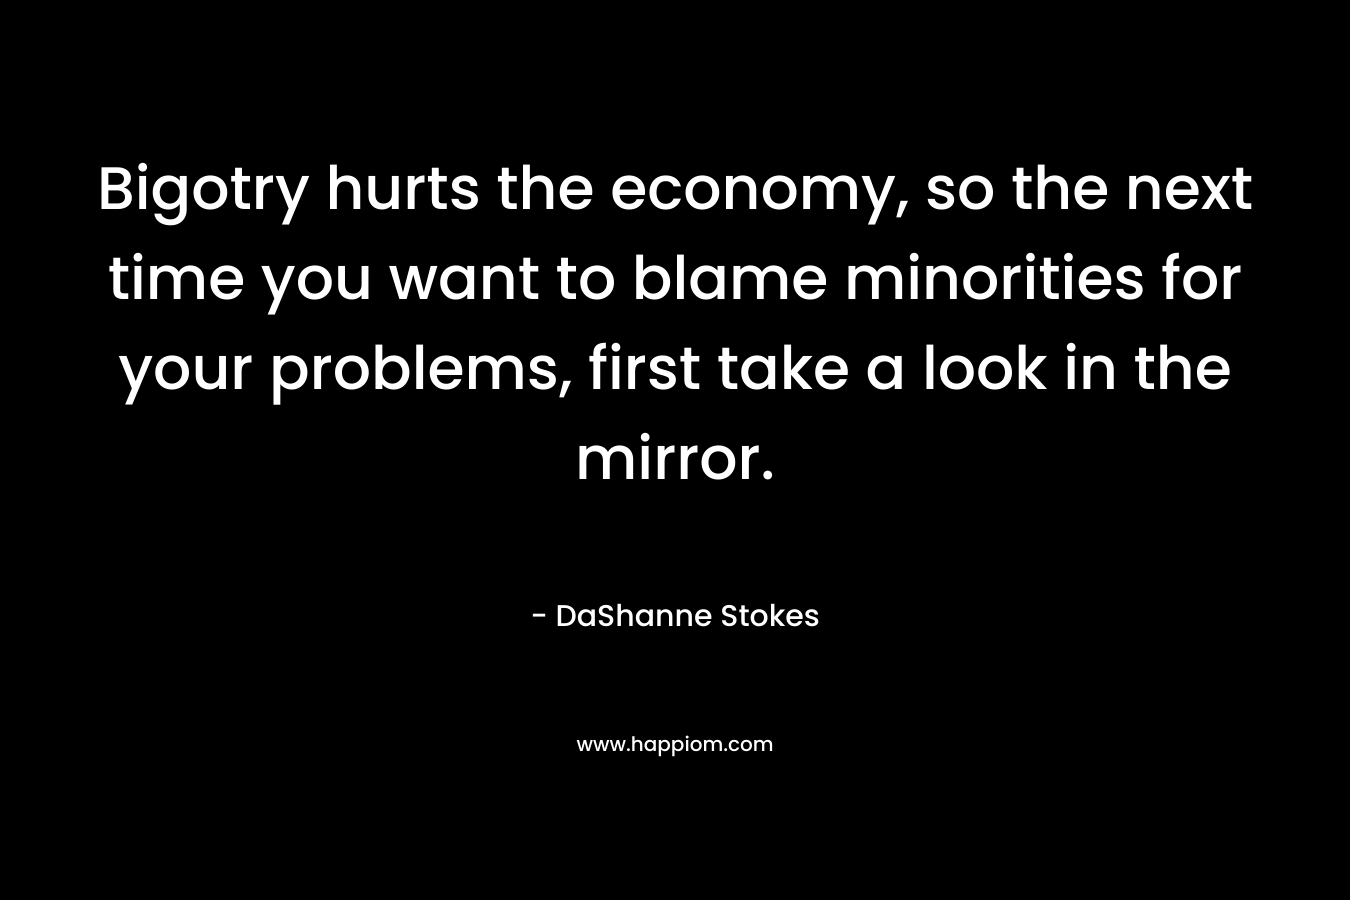 Bigotry hurts the economy, so the next time you want to blame minorities for your problems, first take a look in the mirror.